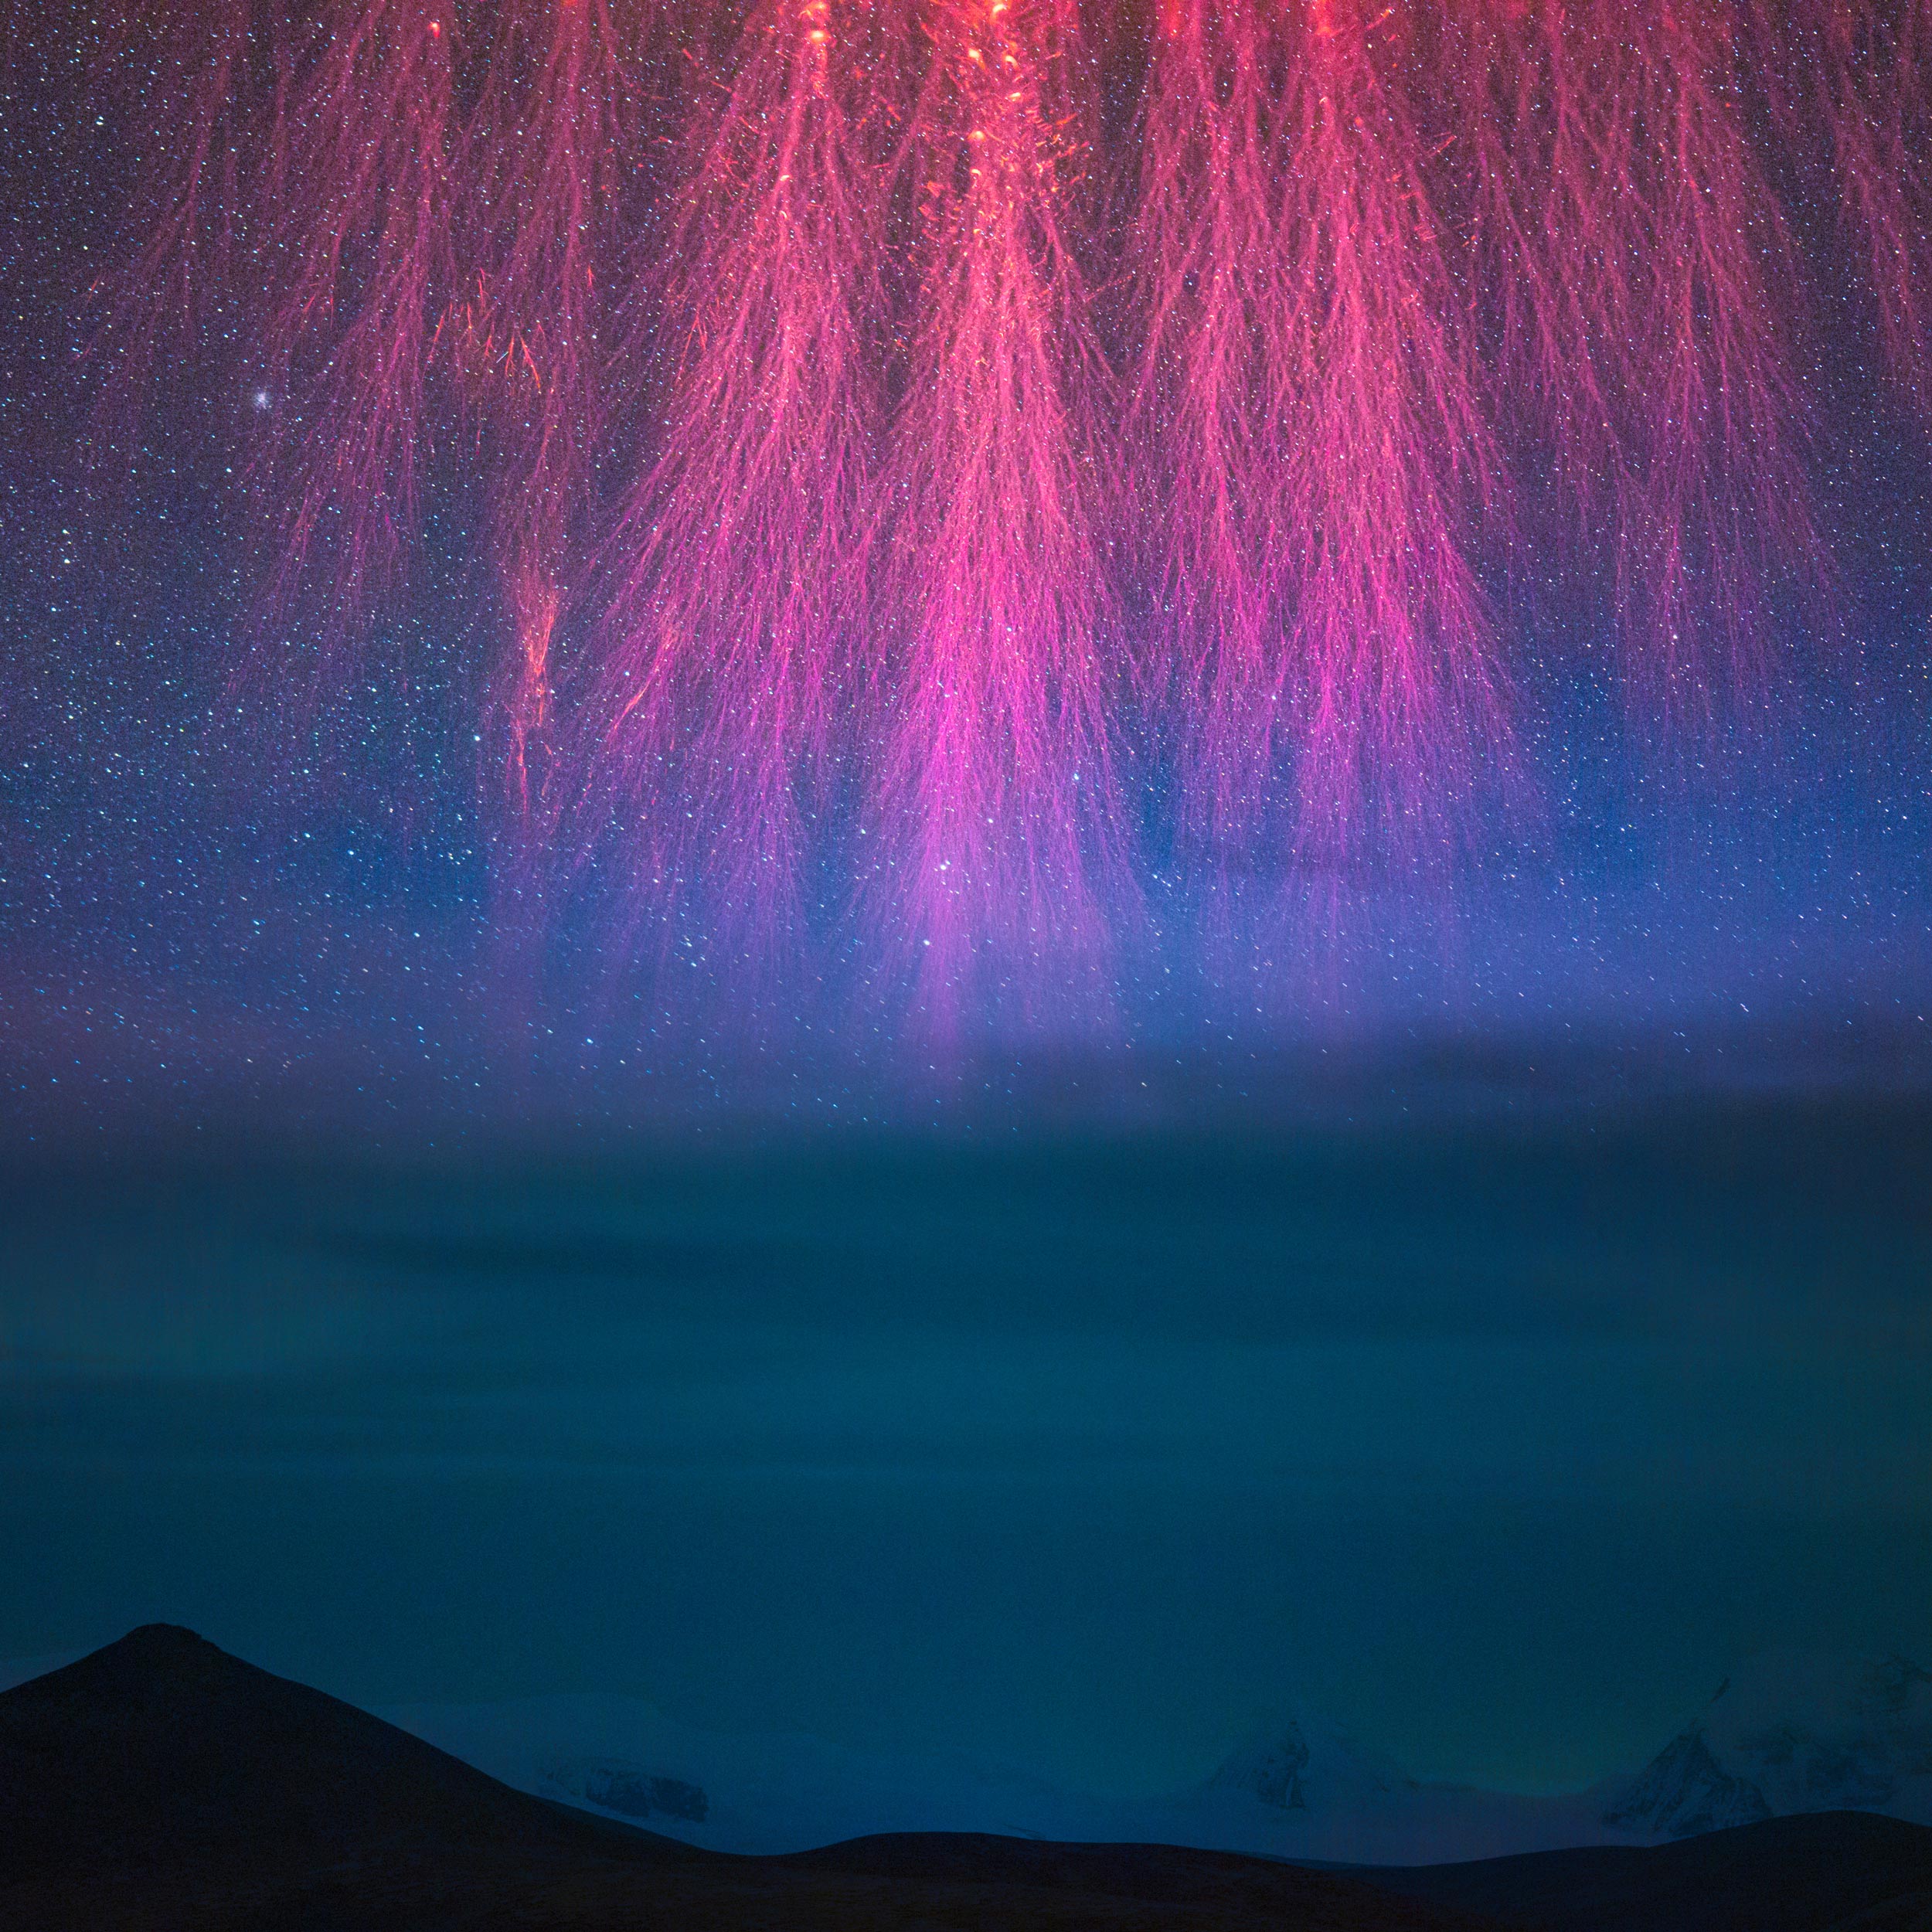 Pink sprites fall from the sky